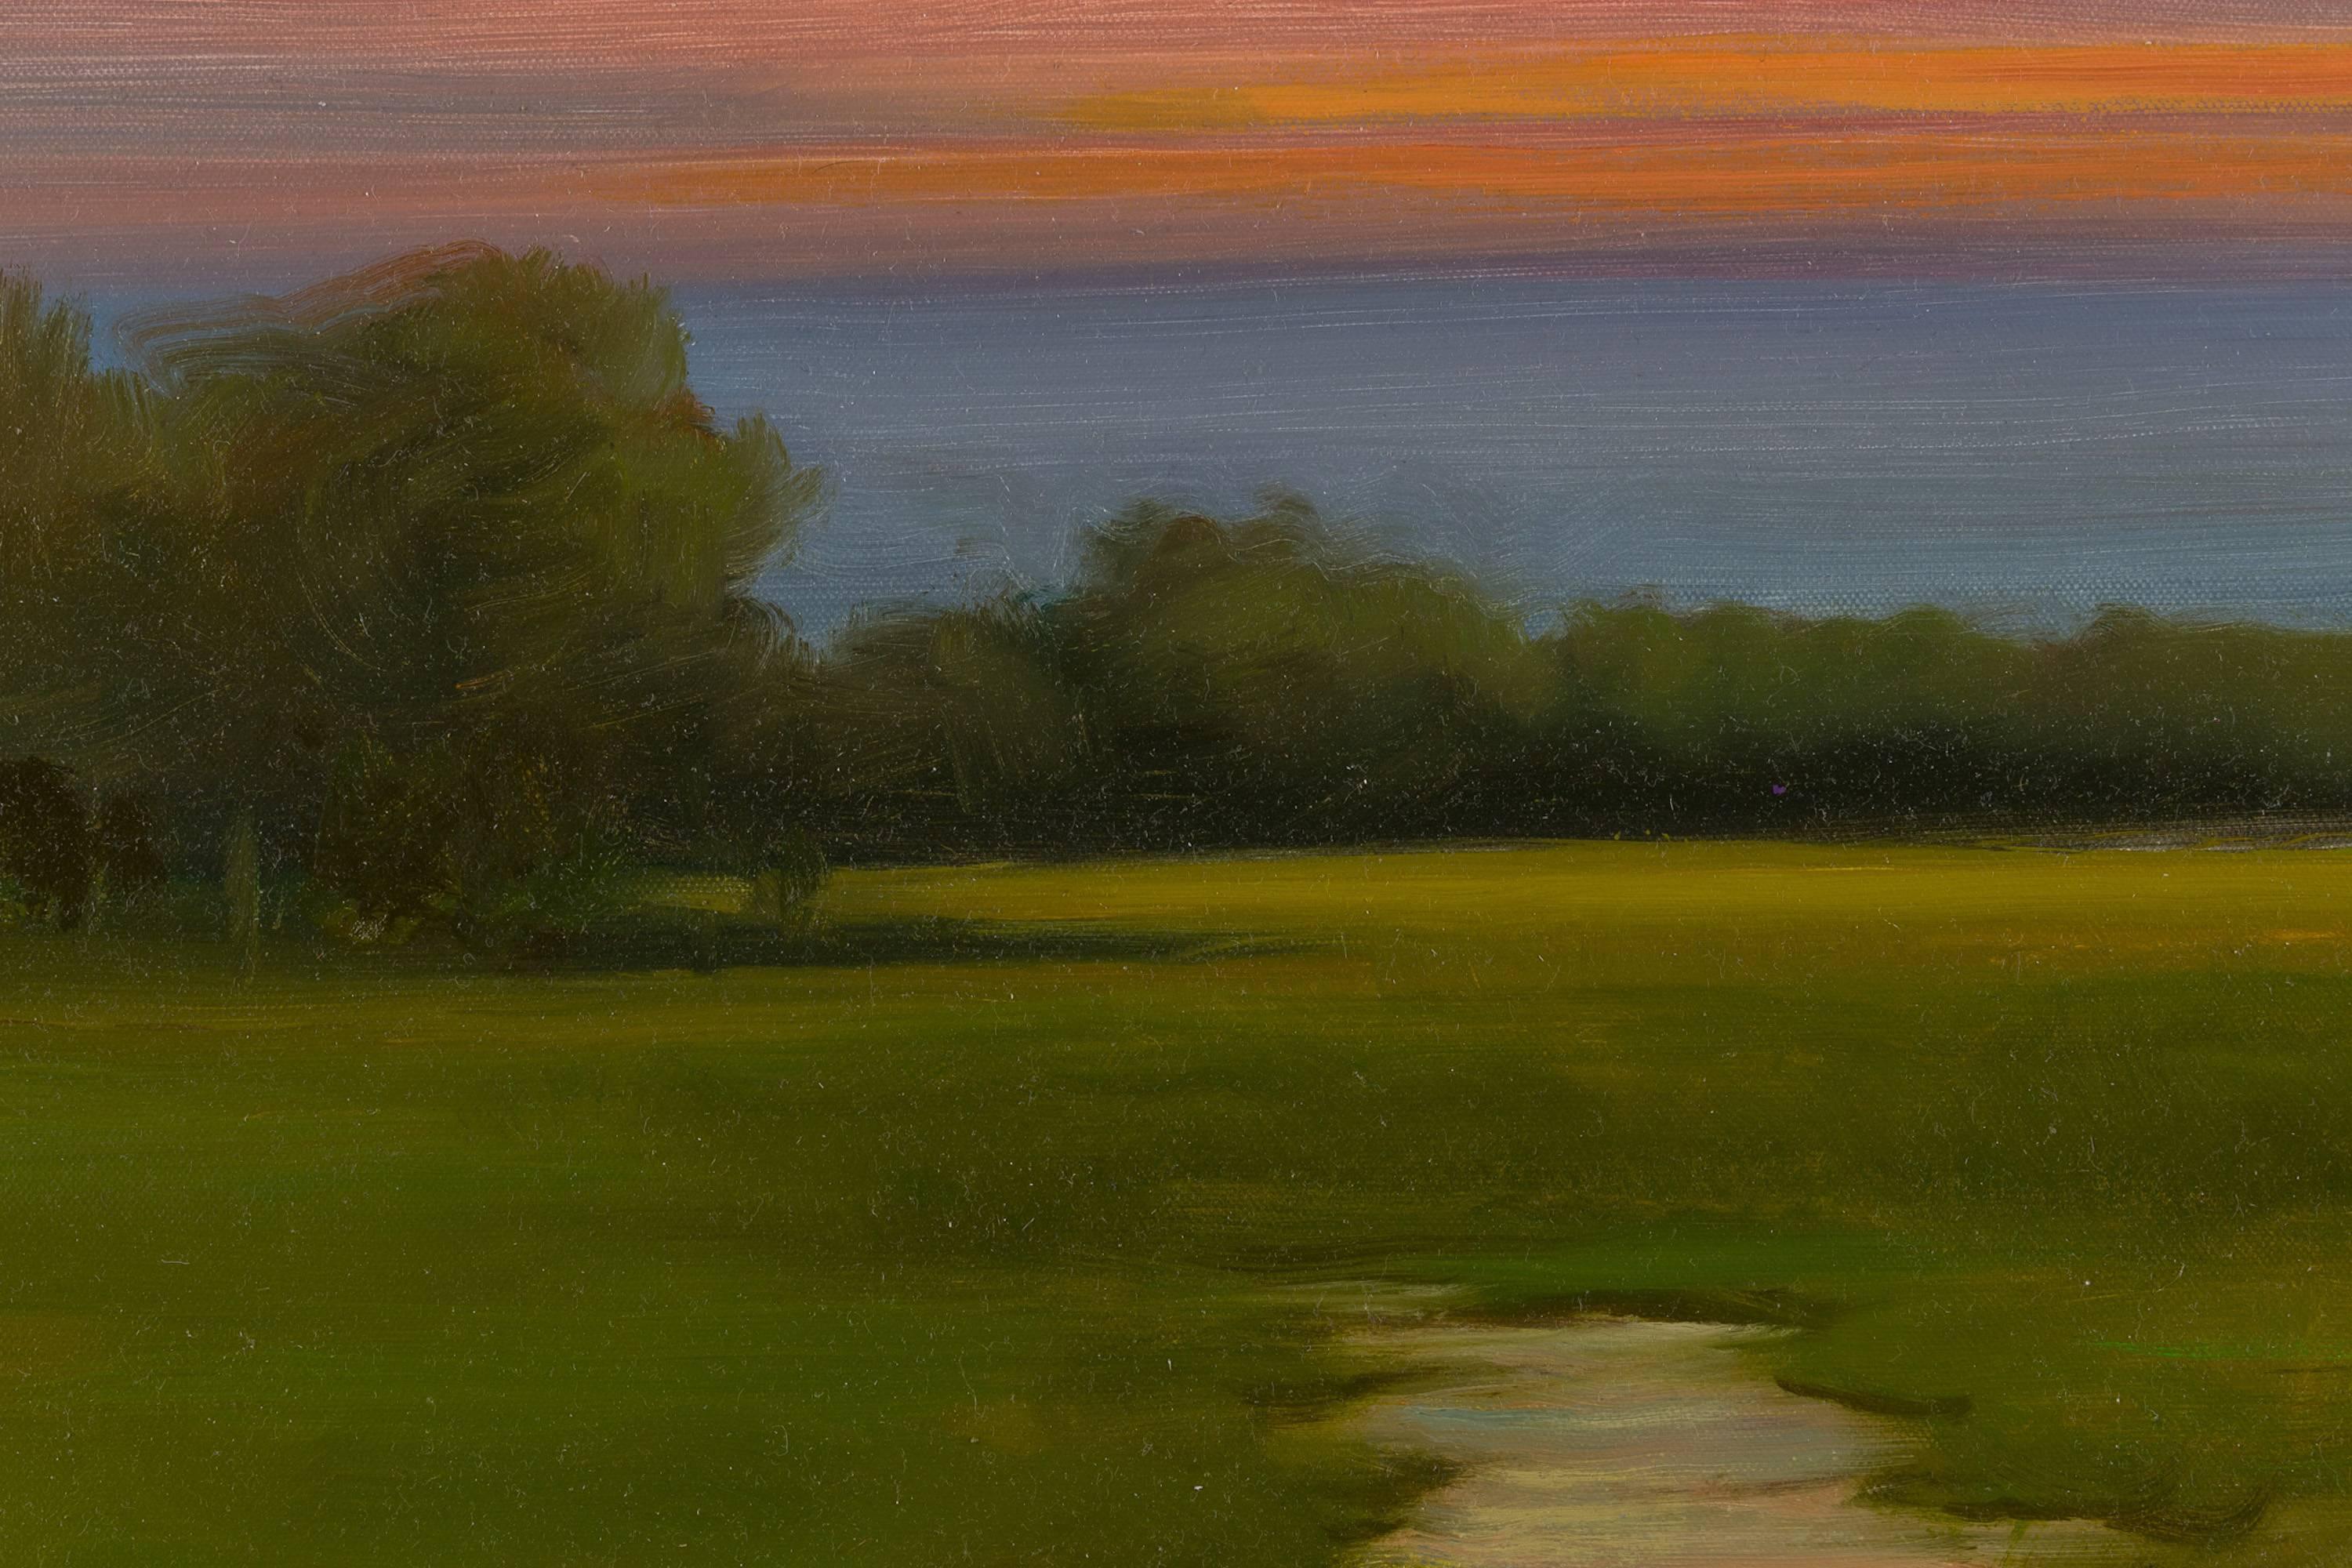 Evening's Blush - Brown Landscape Painting by Dennis Sheehan